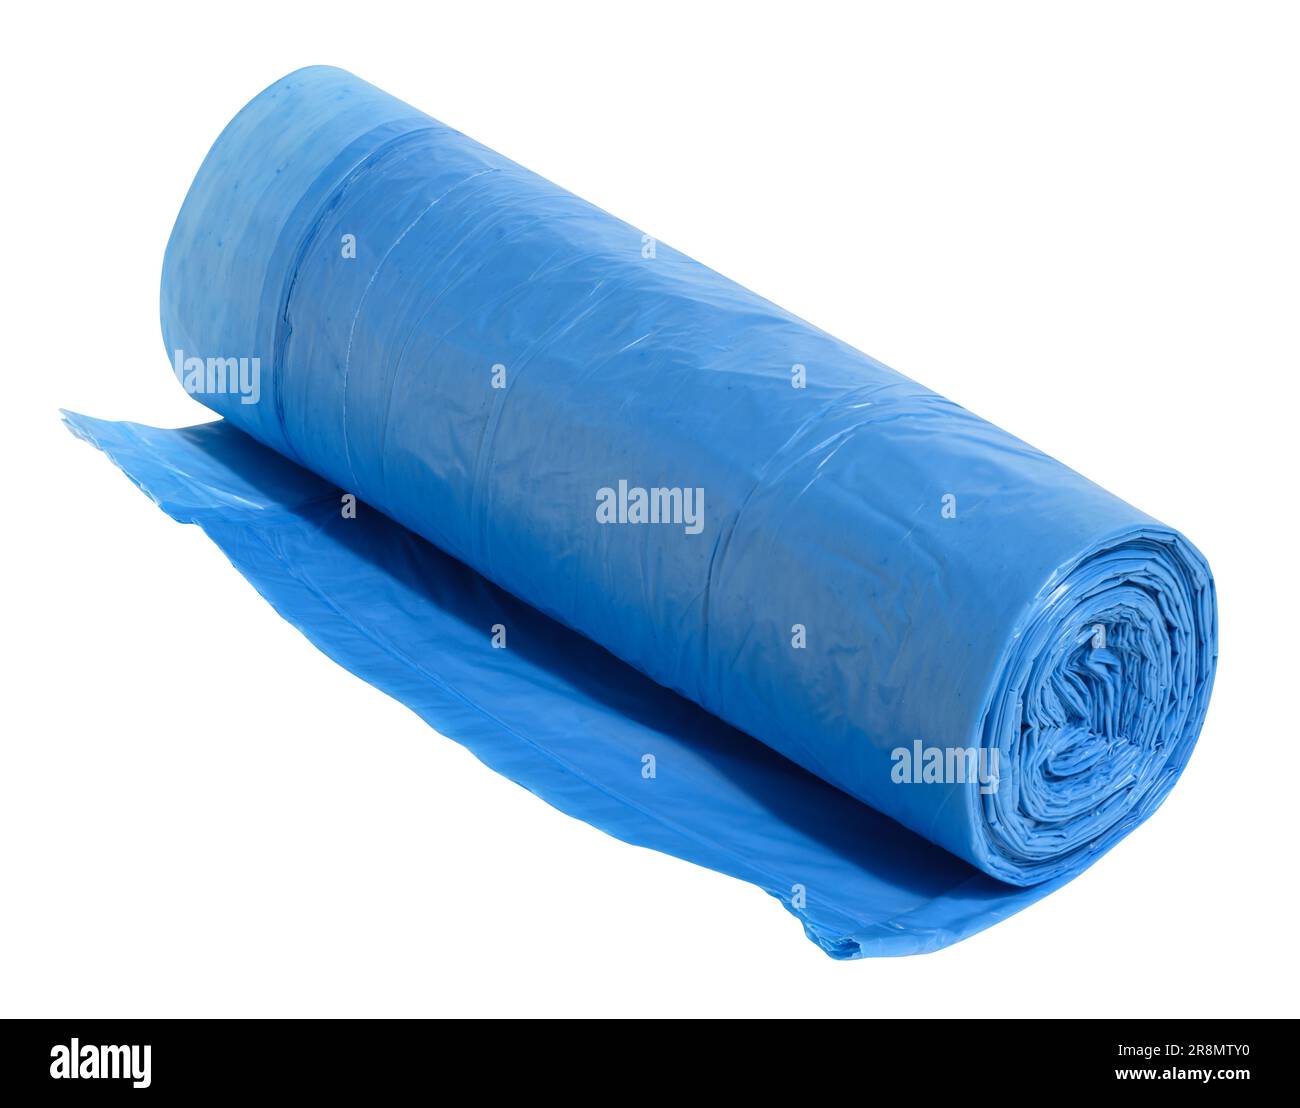 https://c8.alamy.com/comp/2R8MTY0/blue-plastic-trash-bags-with-strings-on-white-background-close-up-2R8MTY0.jpg